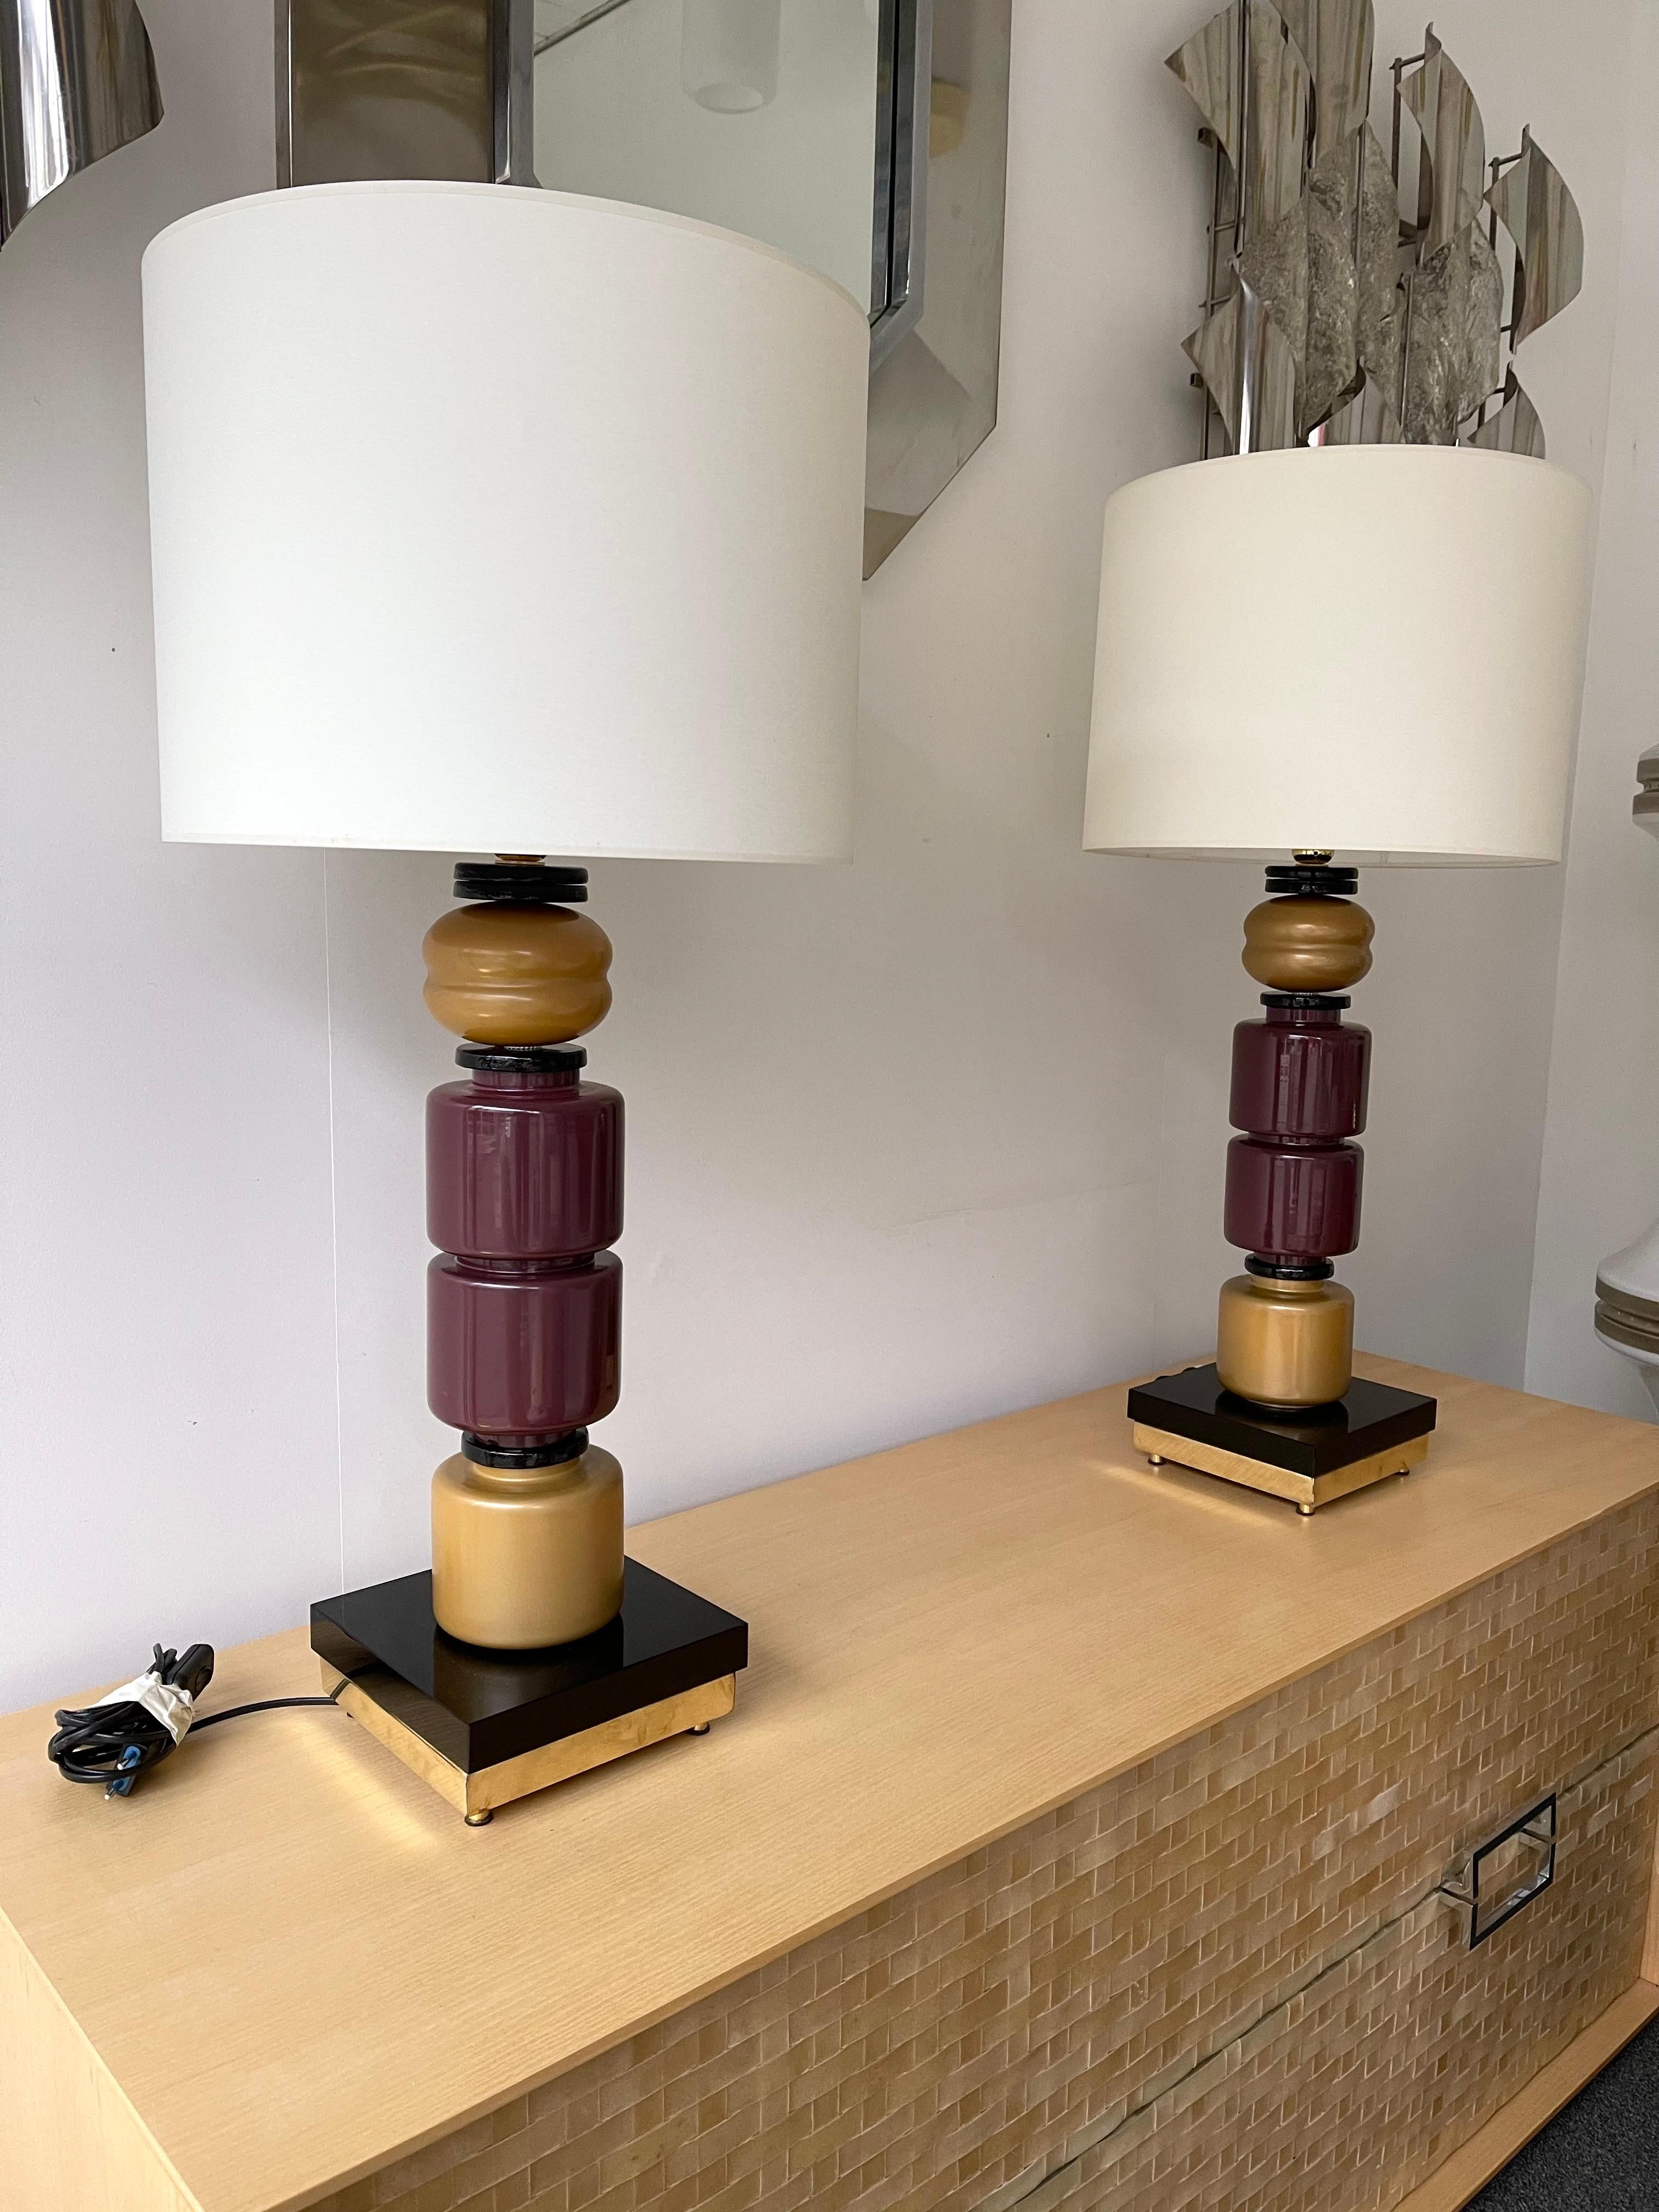 Pair of table or bedside brass totem lamps dark raspberry and gold mustard Murano glass. In an 1980s mood like Sottsass, Michele De Lucchi, Alessandro Mendini, Andrea Branzi, Nathalie du Pasquier, Michael Graves, Hans Hollein, Arata Isozaki, Shiro